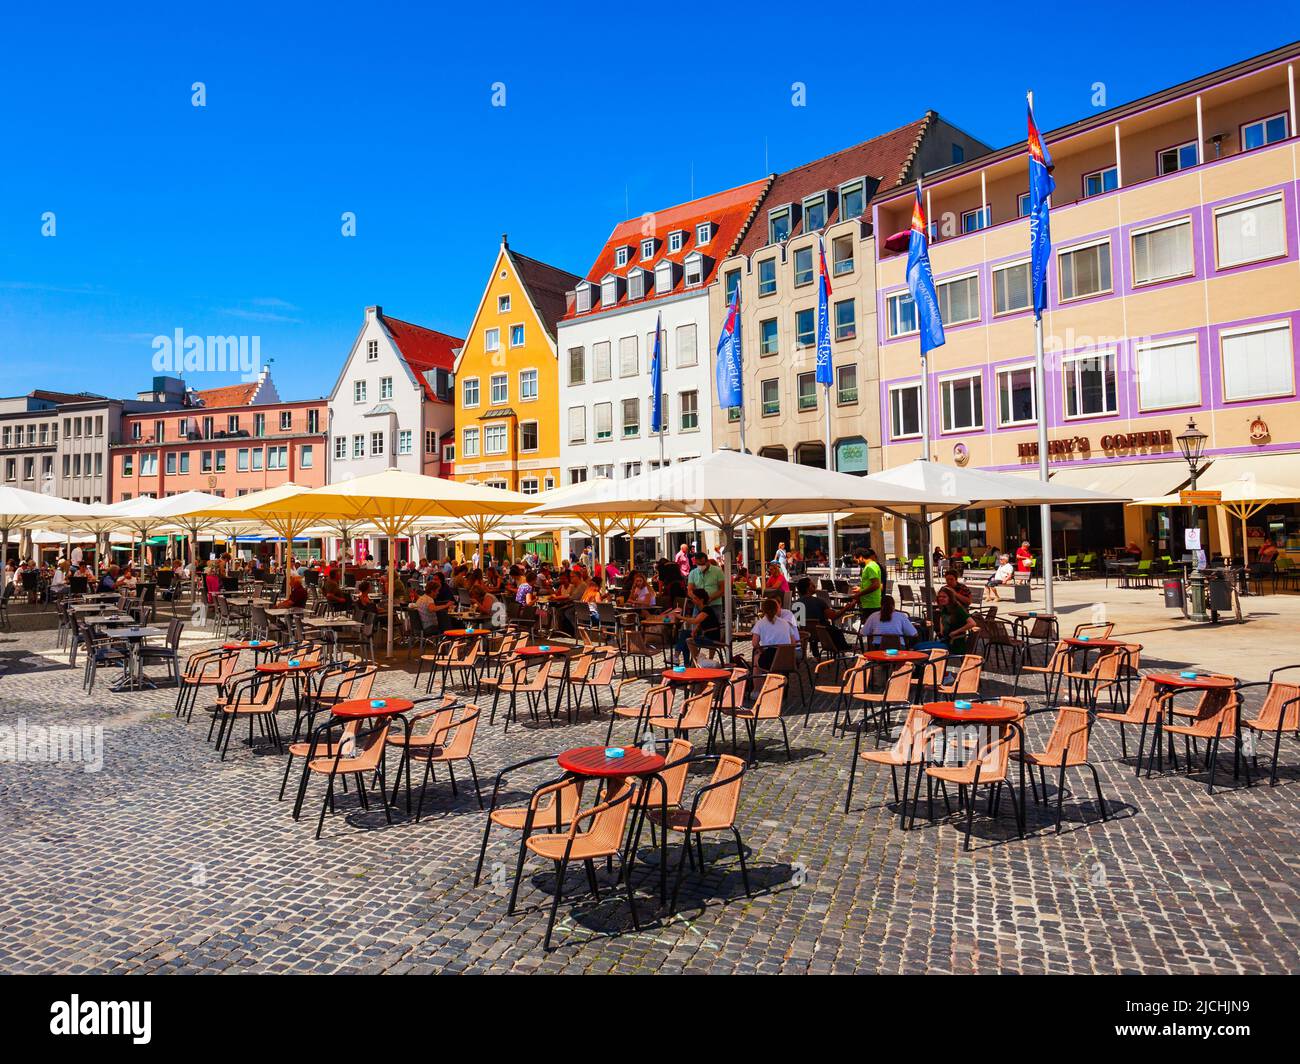 Augsburg, Germany - July 06, 2021: Street cafe at Town Hall square or Rathausplatz main square in Augsburg. Augsburg is a city in Swabia, Bavaria regi Stock Photo